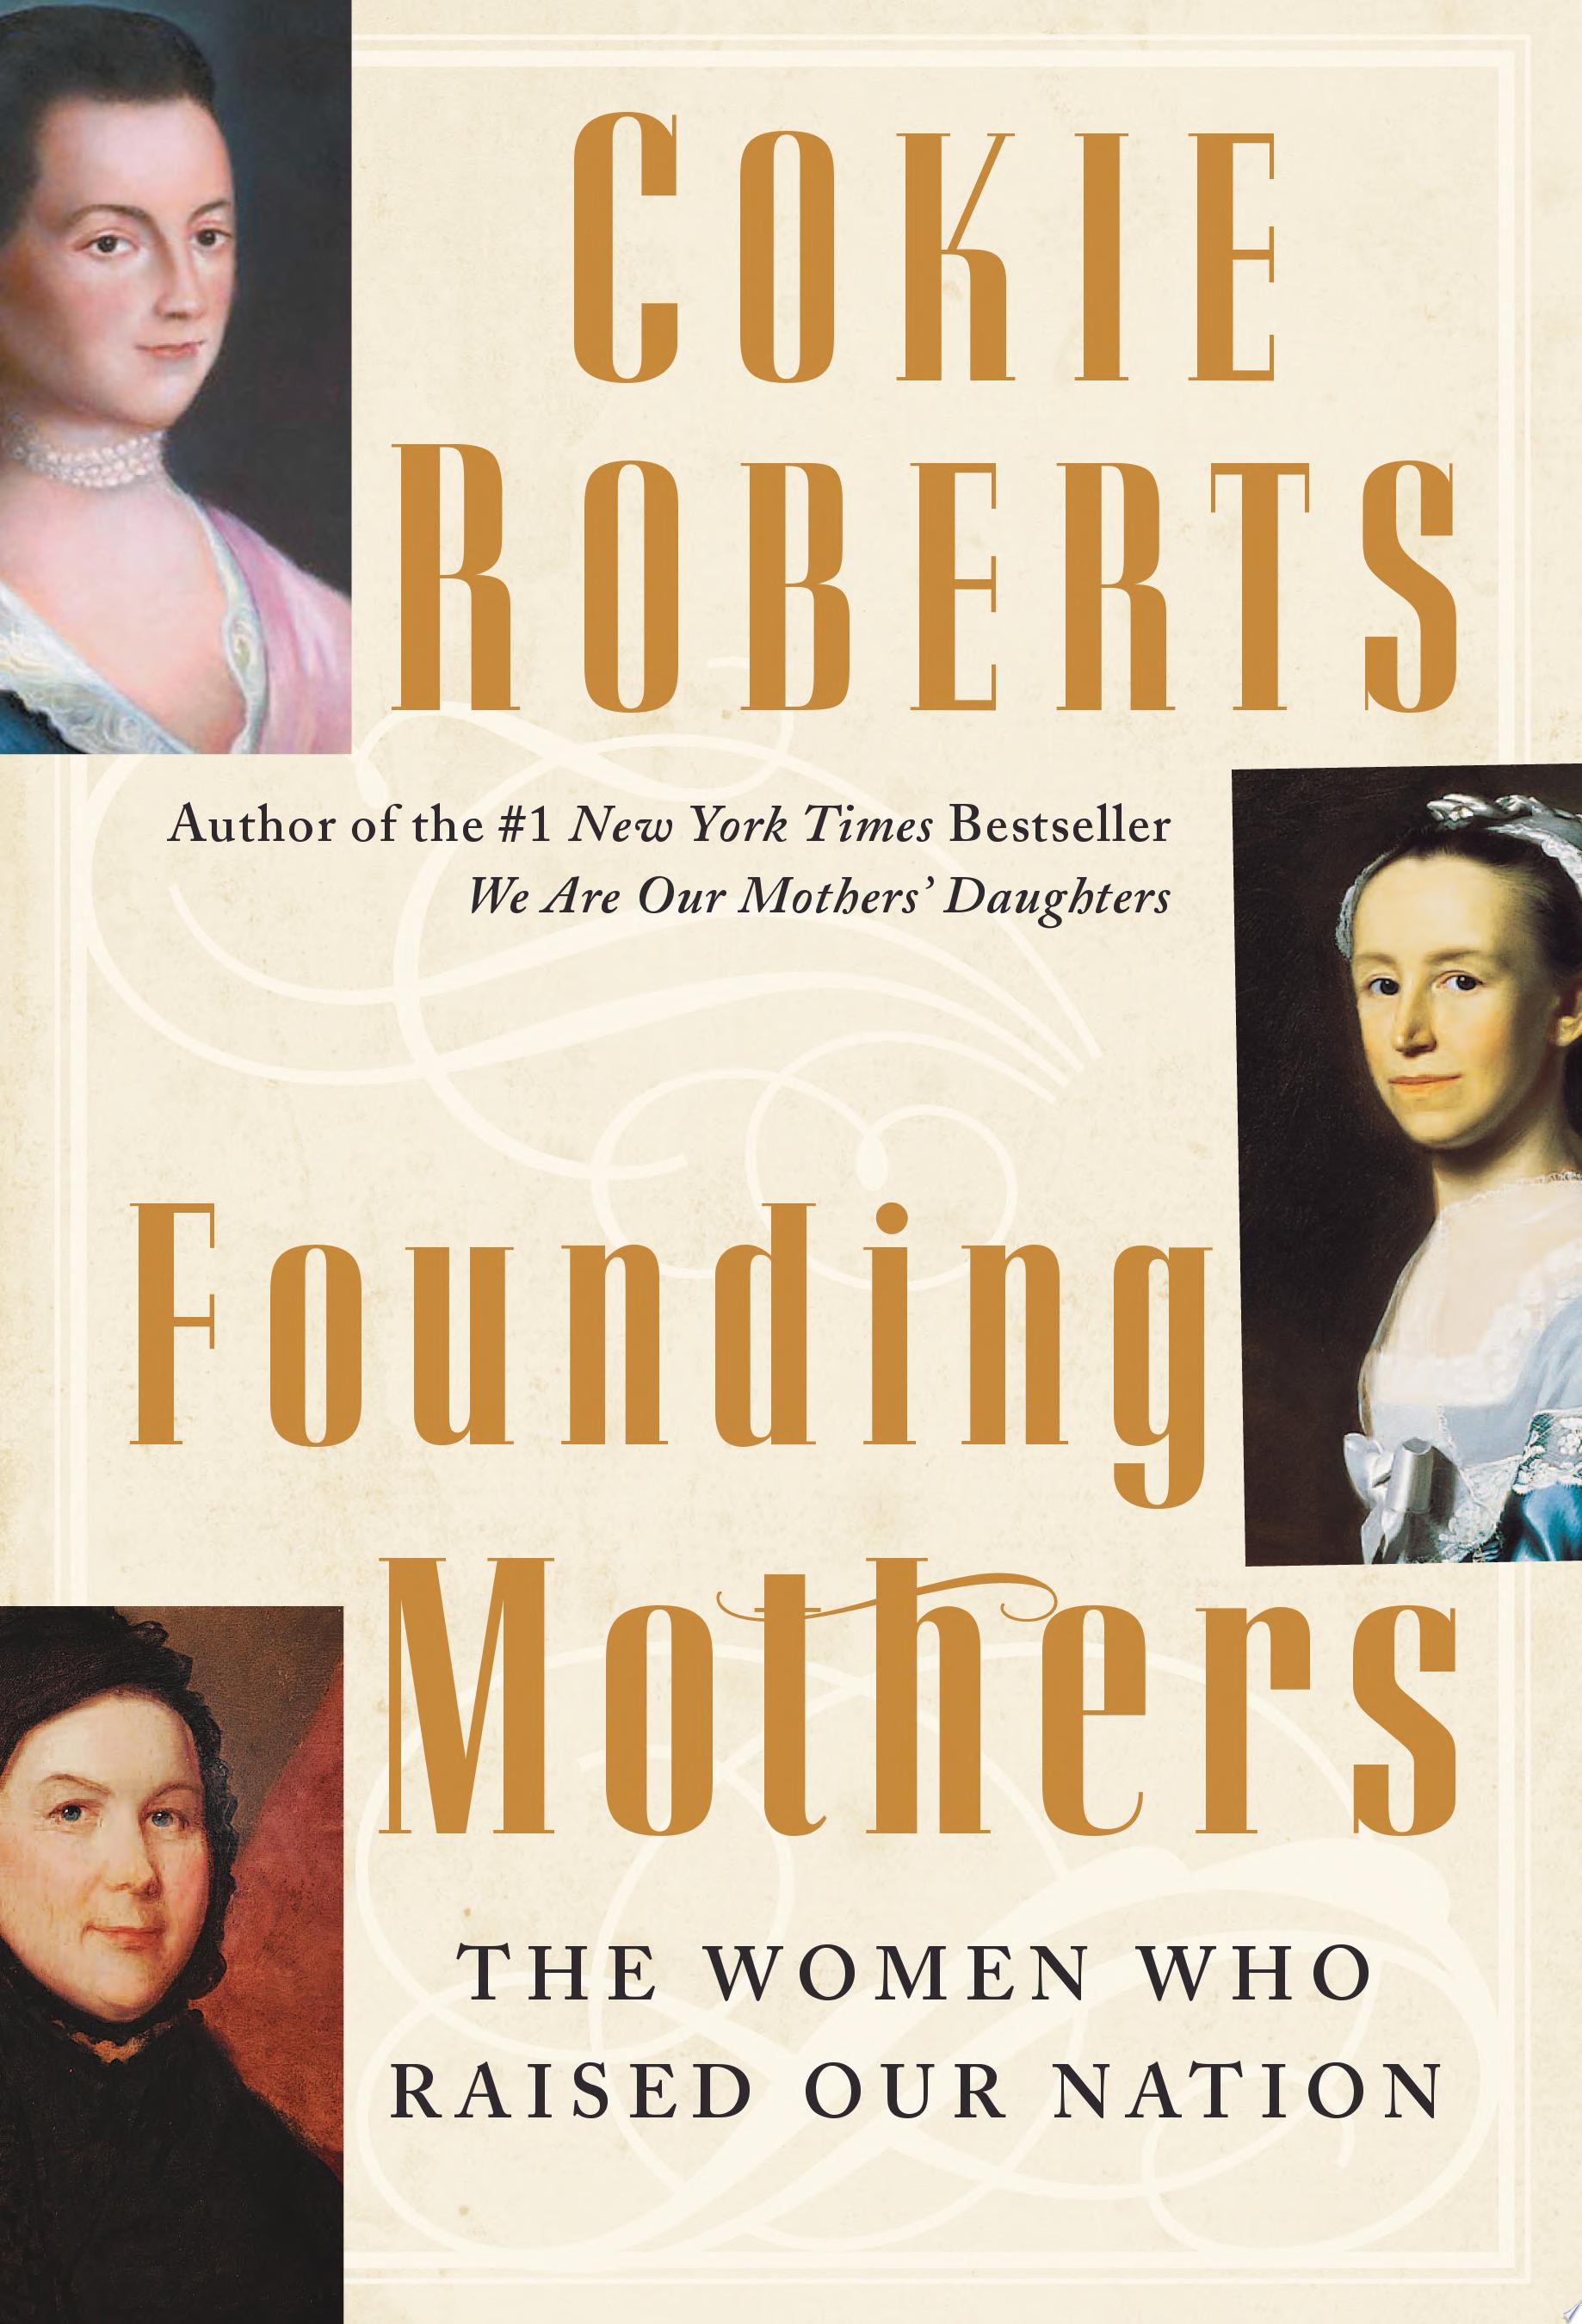 Image for "Founding Mothers"